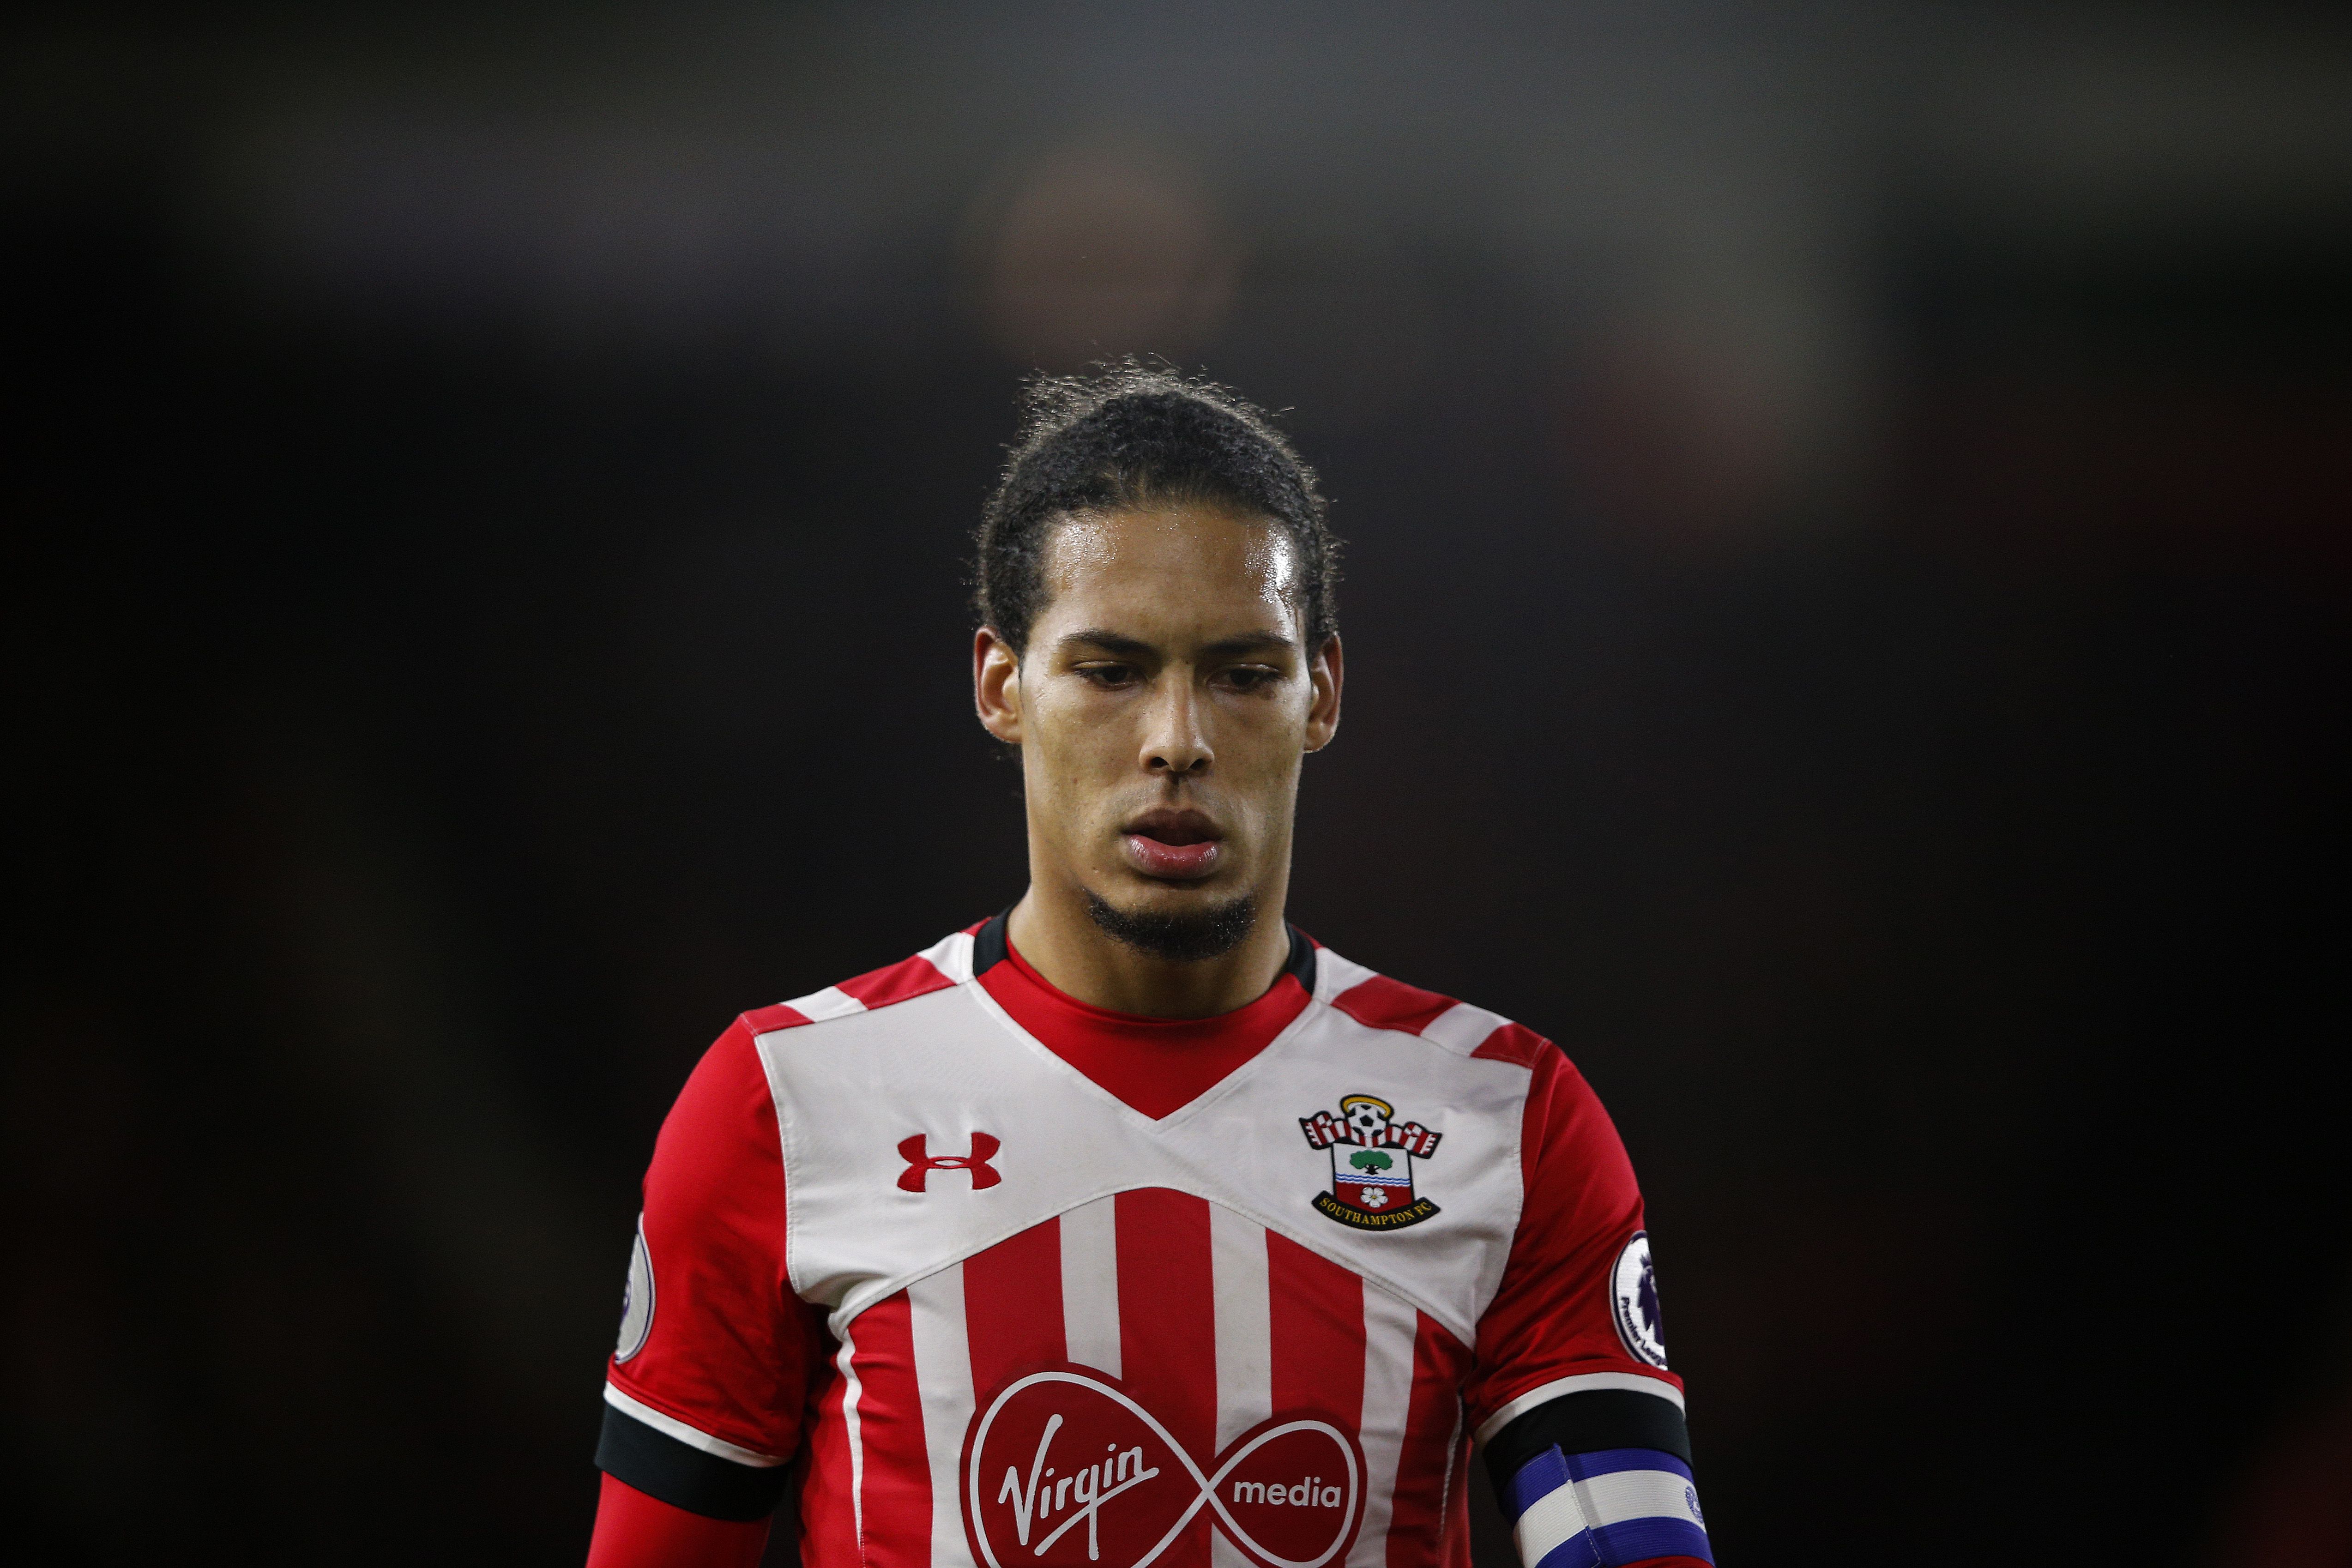 Former captain Virgil van Dijk is one of many star players that have been poached away from Southampton over the years. (Photo by Adrian Dennis/AFP/Getty Images)